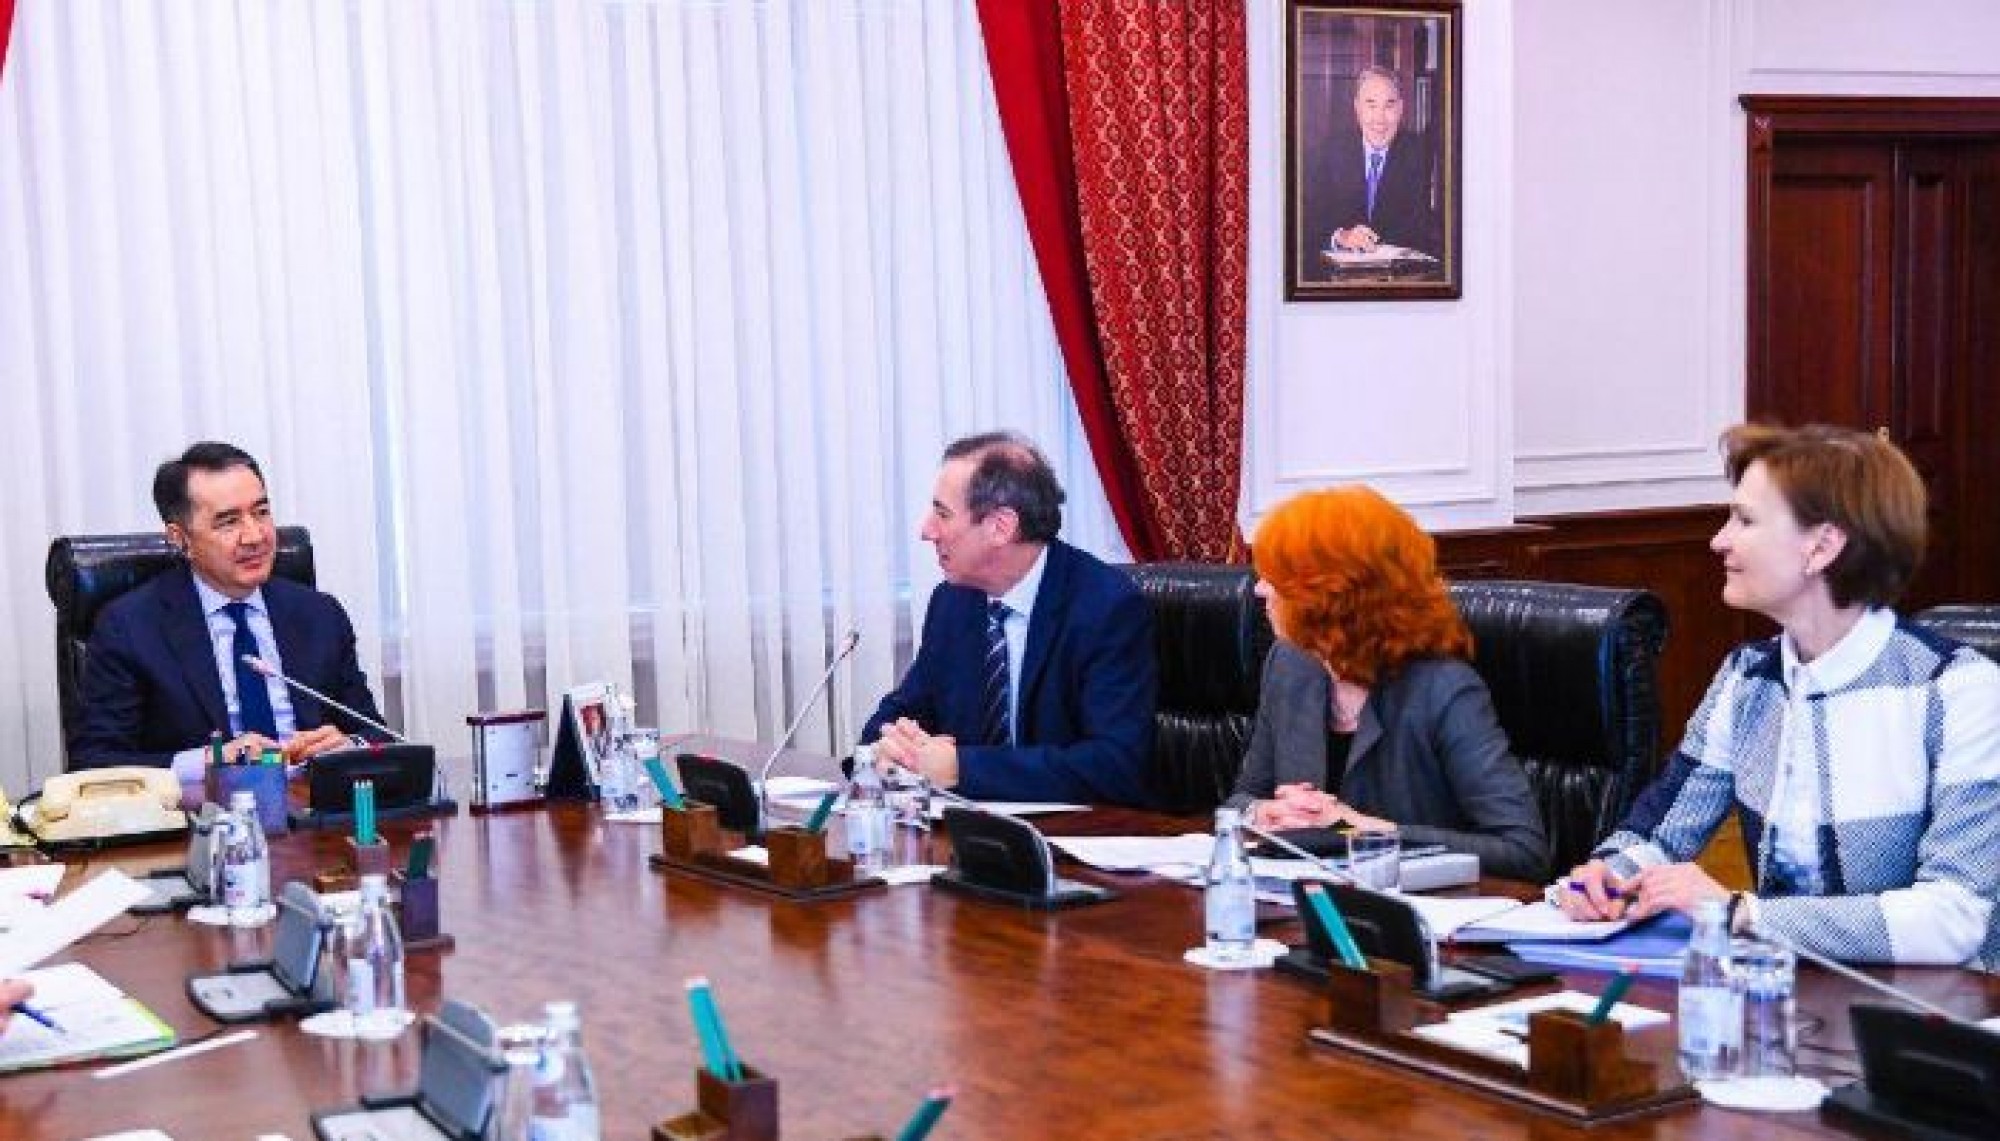 Kazakh PM meets with vice presidents of World Bank and International Finance Corporation